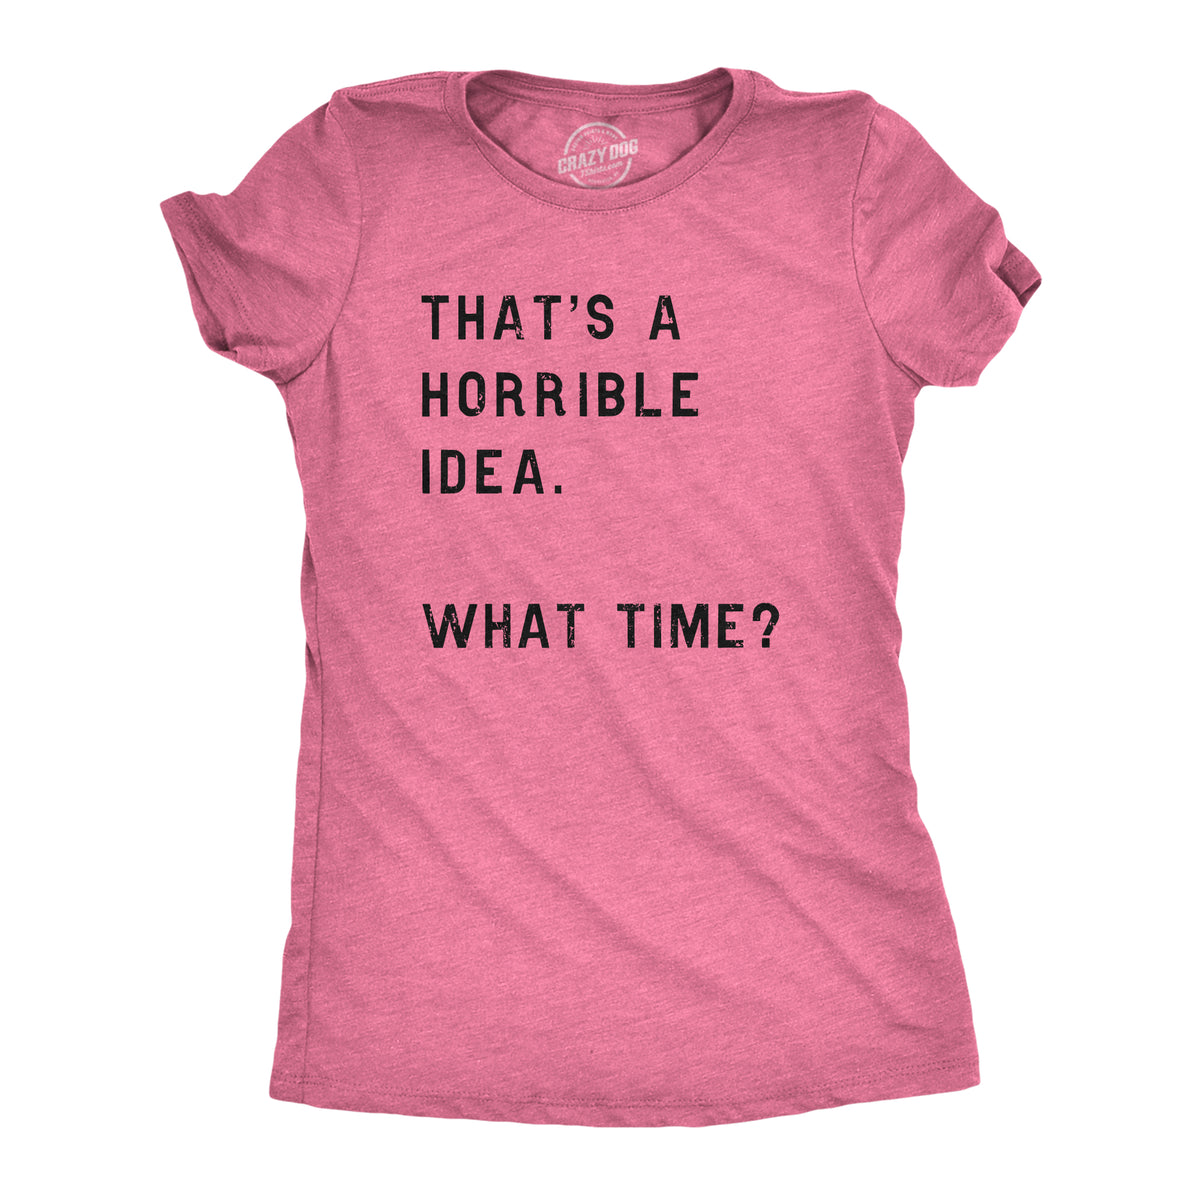 Funny Heather Pink That Sounds Like A Horrible Idea. What Time? Womens T Shirt Nerdy Sarcastic Tee